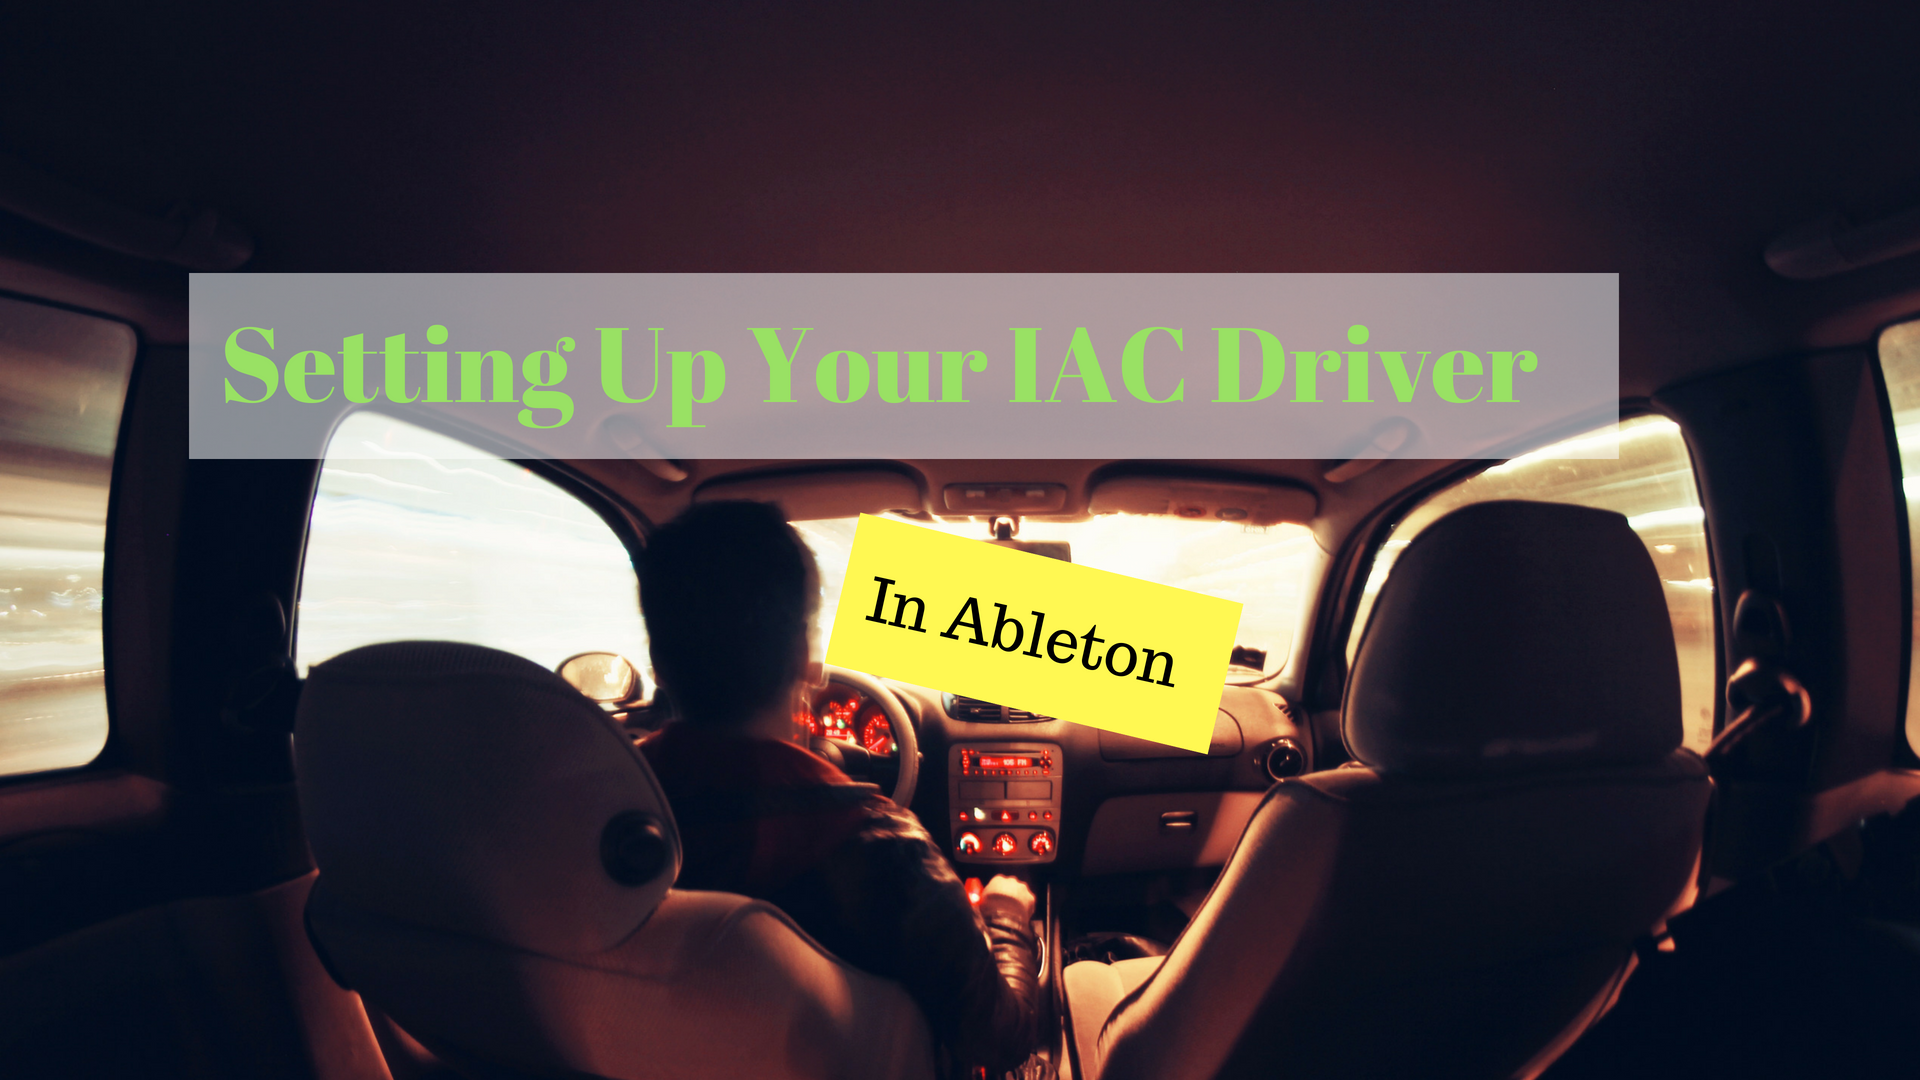 Setting up your IAC driver